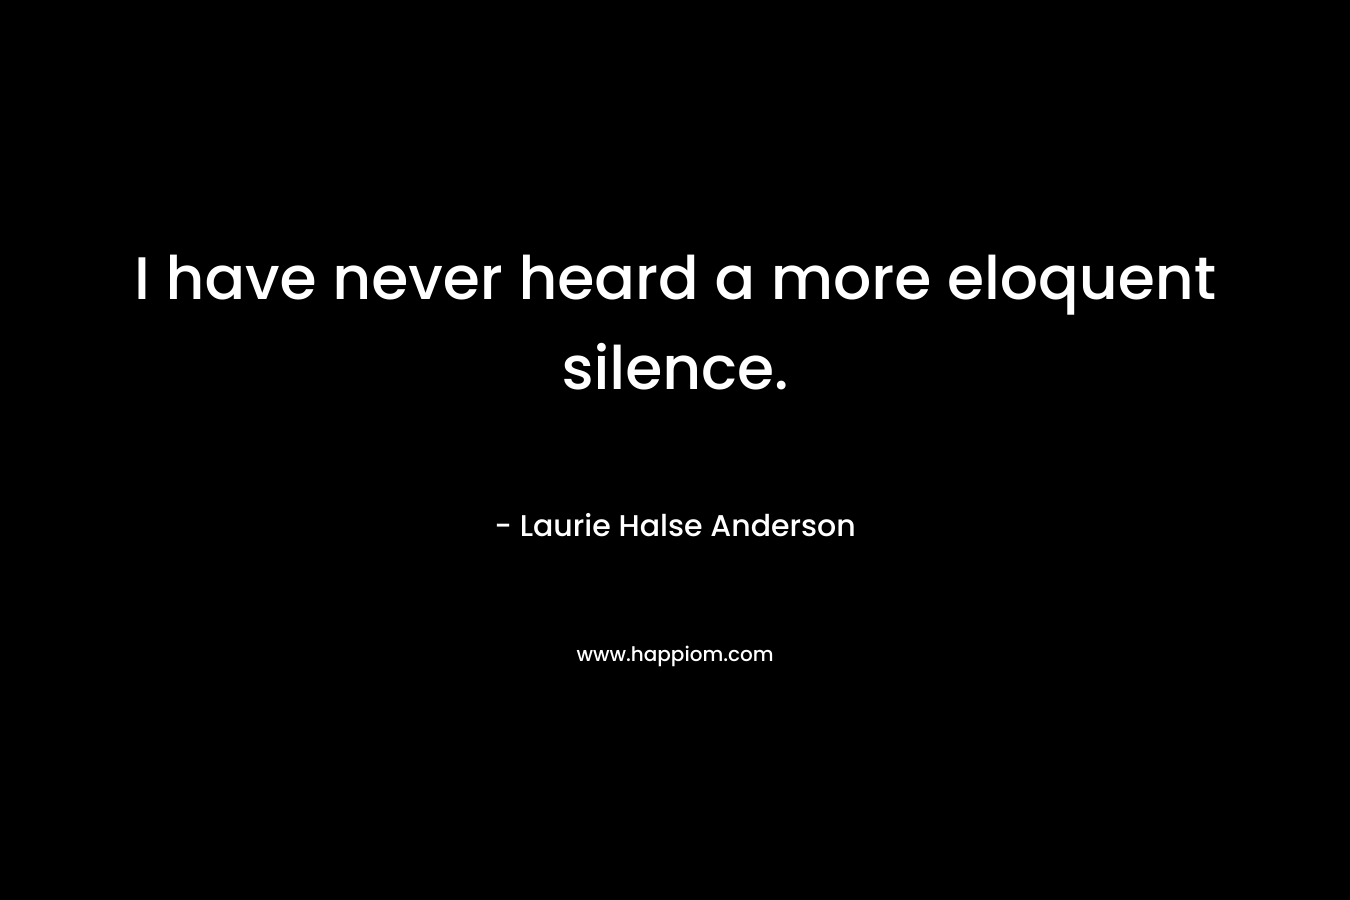 I have never heard a more eloquent silence. – Laurie Halse Anderson